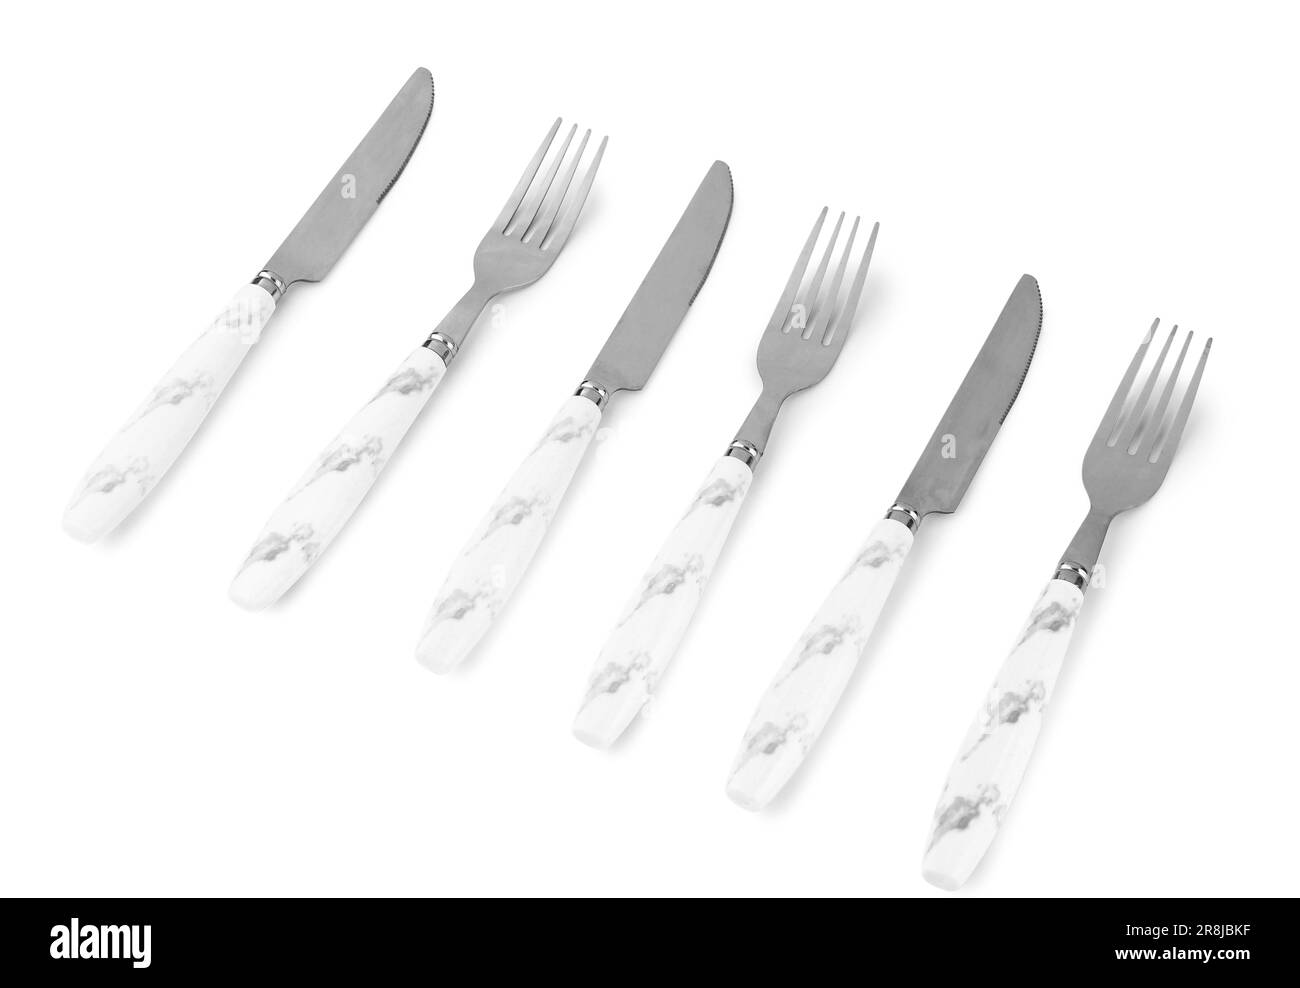 Stainless steel forks and knives with plastic handles on white background Stock Photo